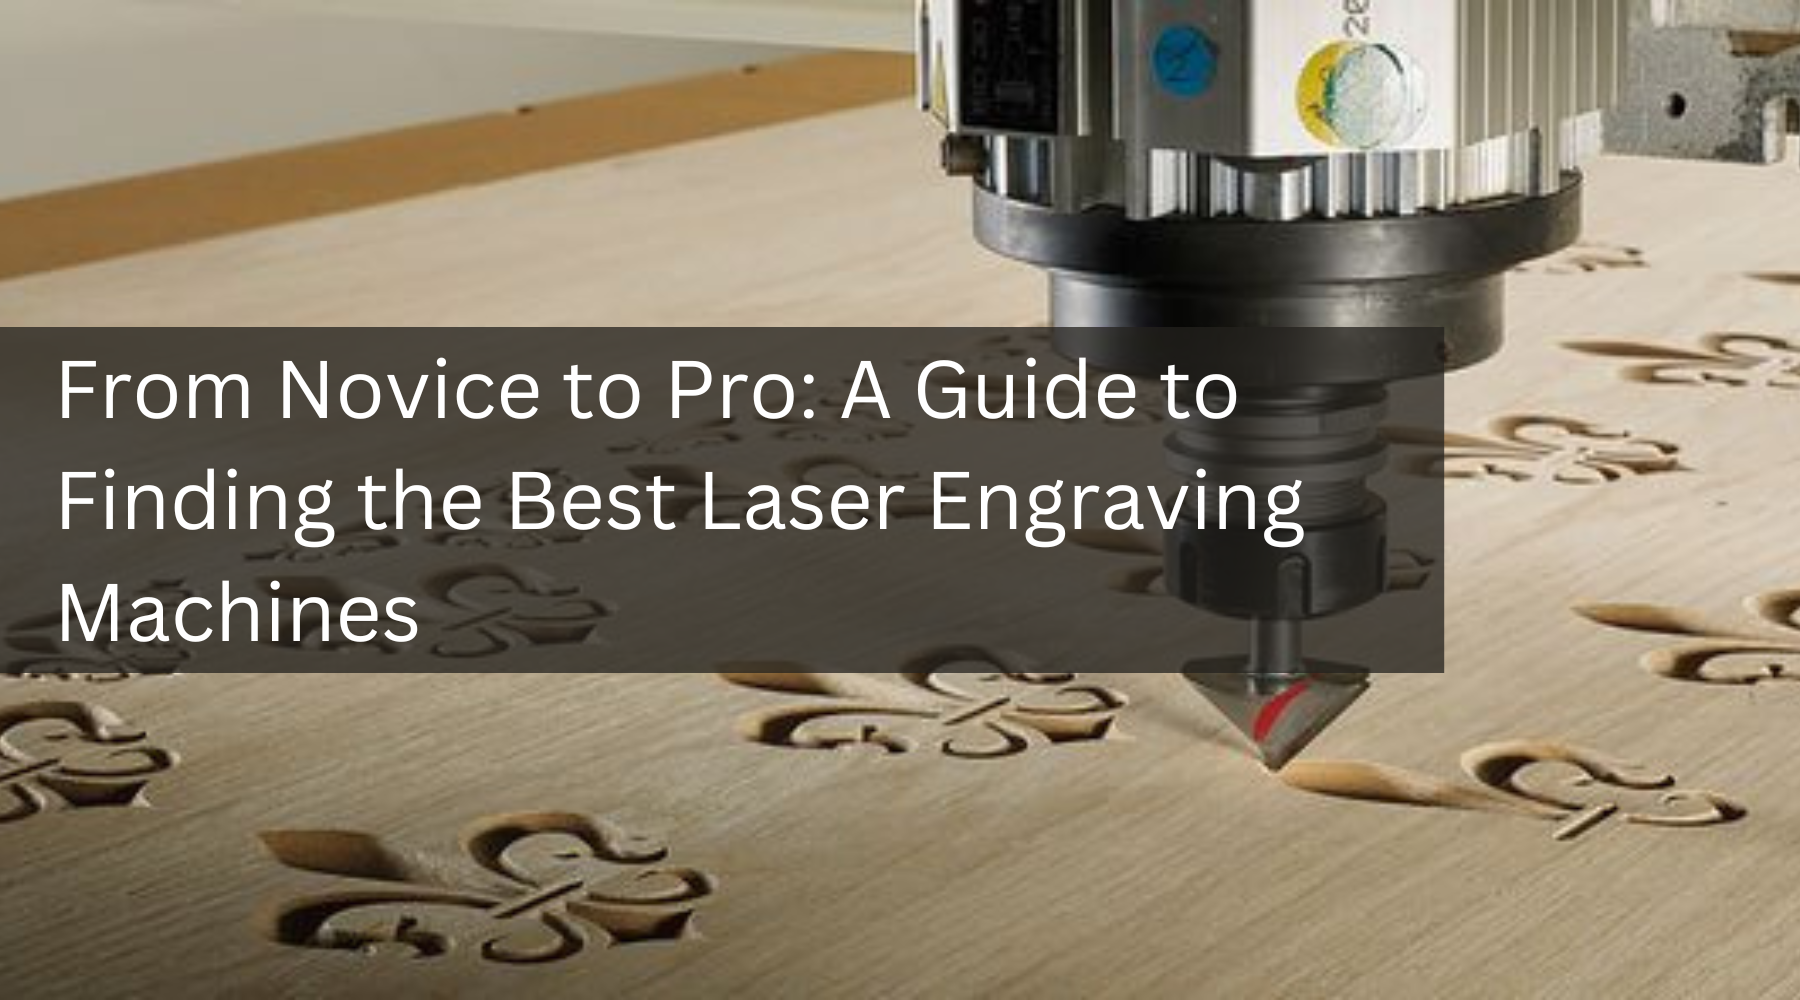 From Novice to Pro: The Ultimate Guide to Finding the Best Laser Engraving Machines